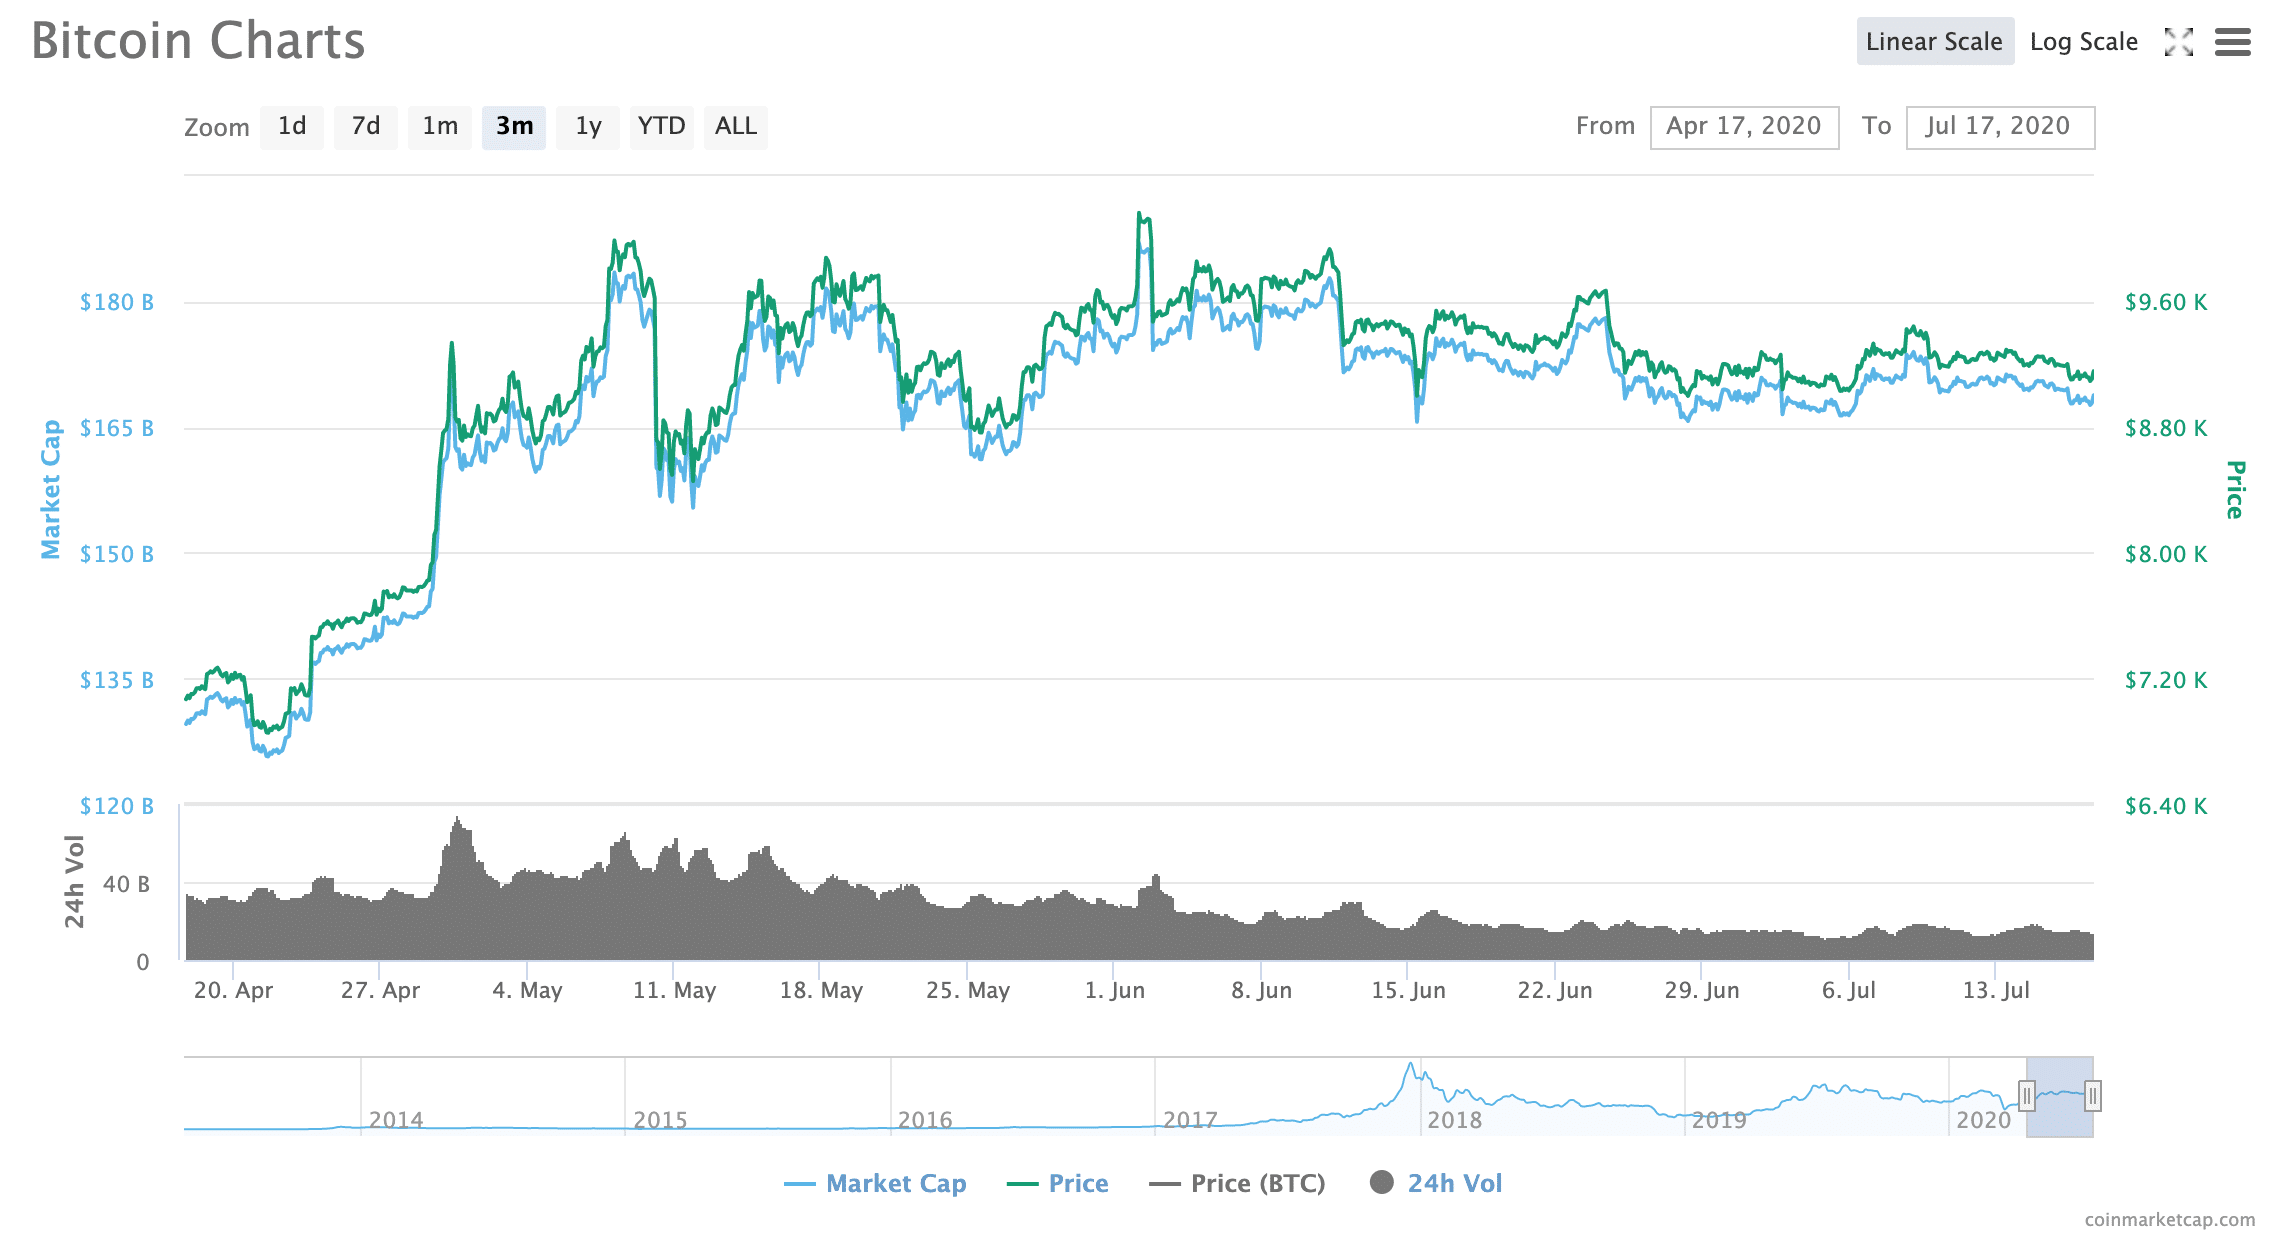 Alt-Season: What’s Driving Some Altcoins to New Highs? 